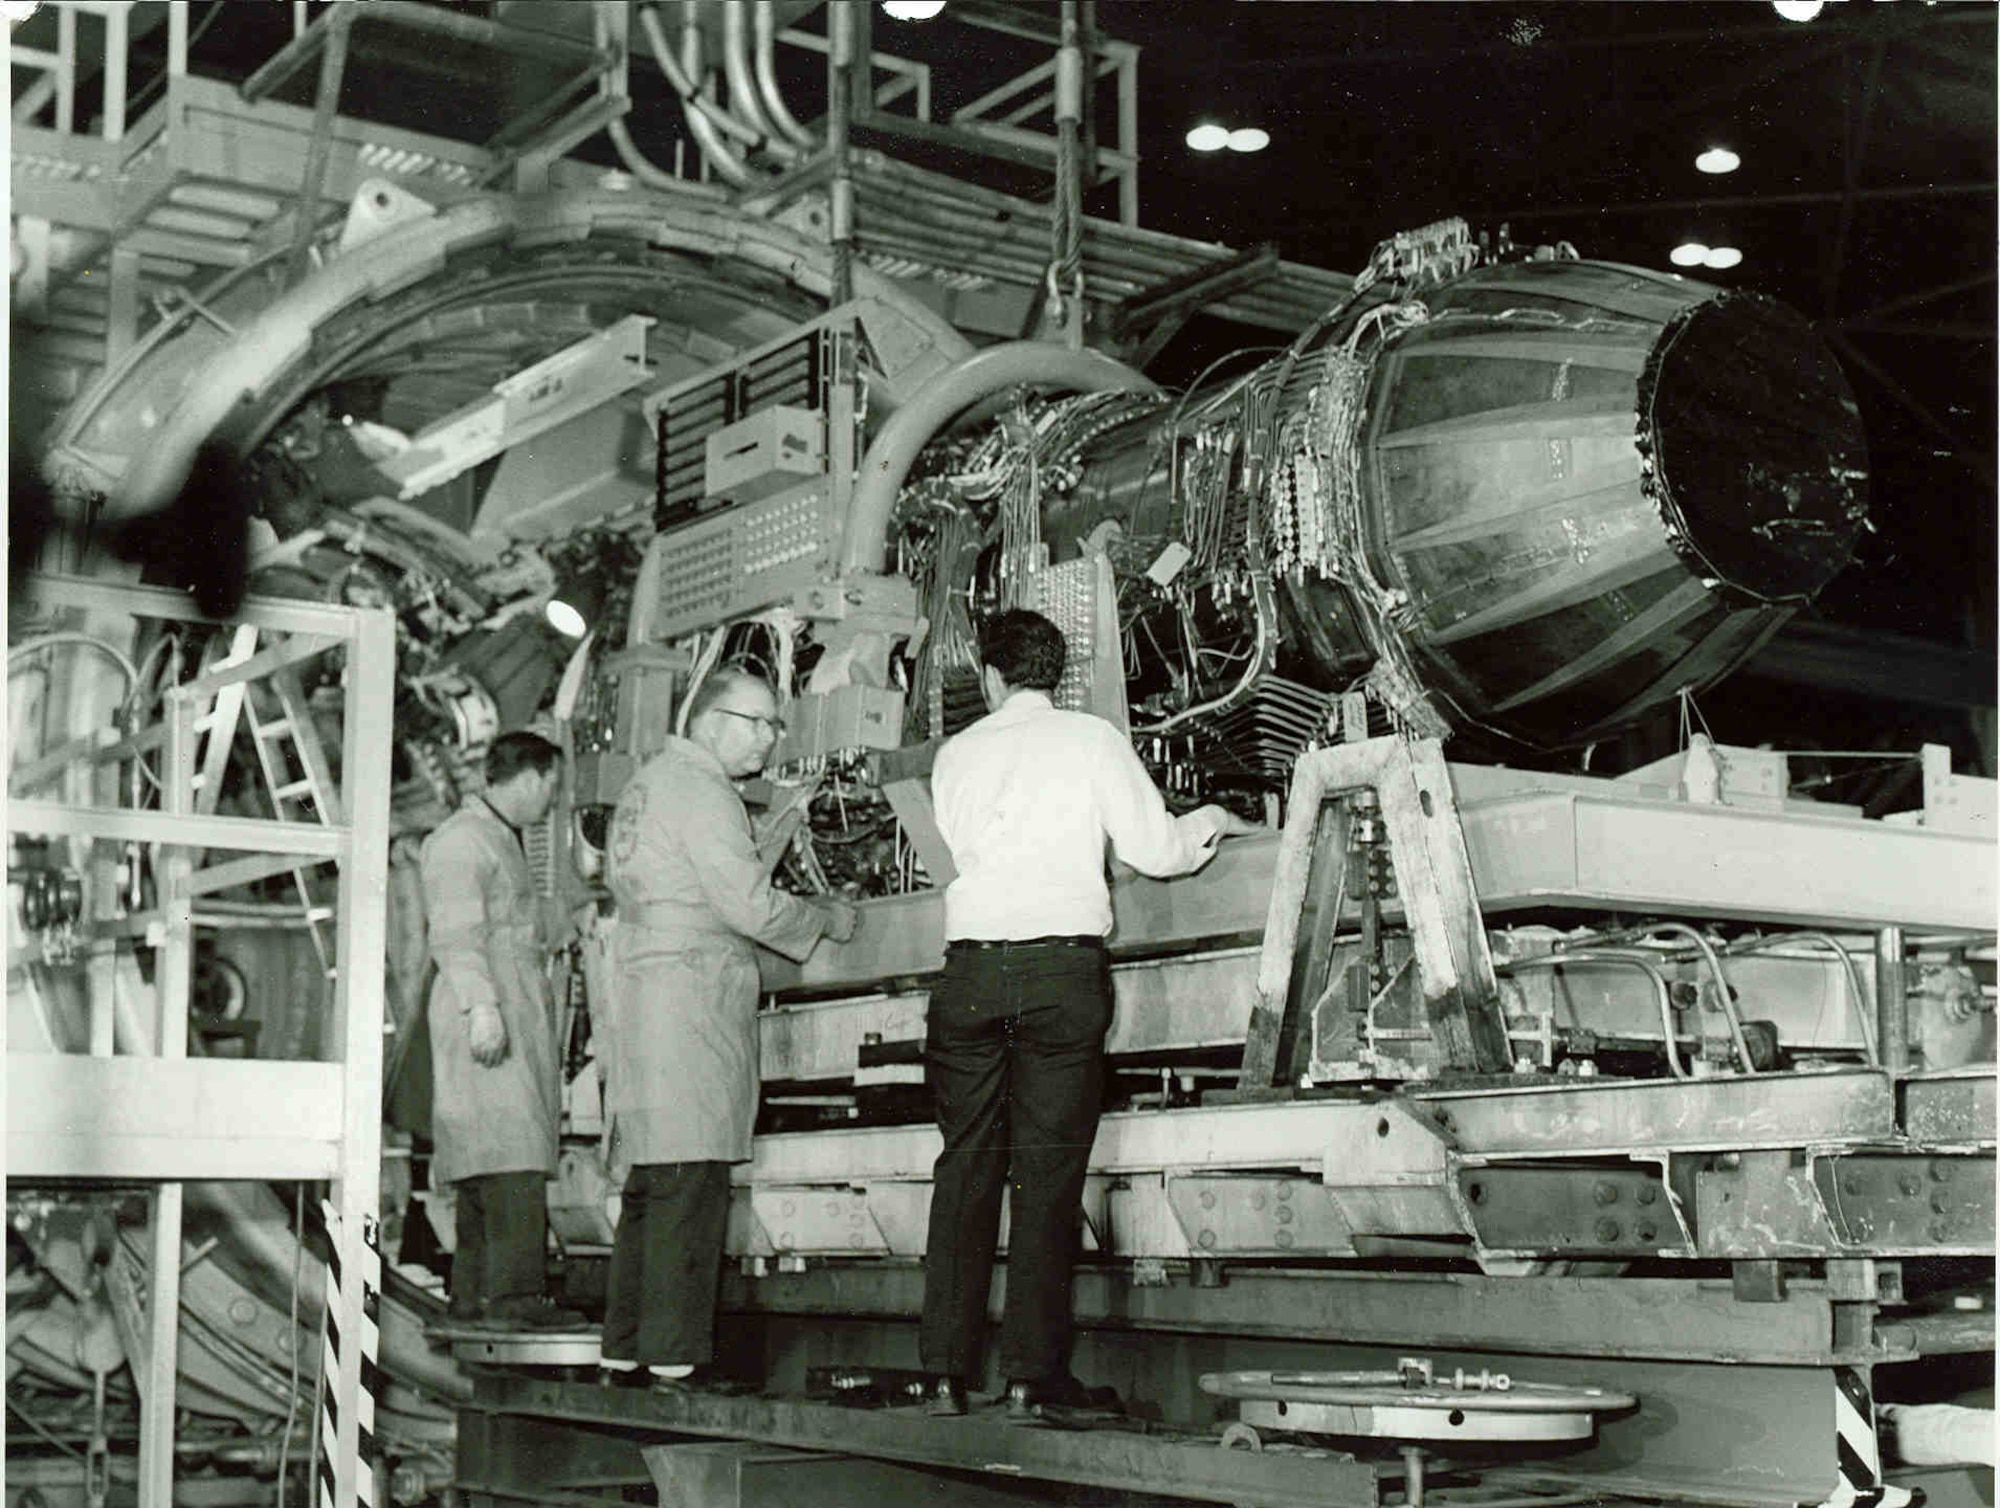 Hundreds of instrumentation lines used to sense or measure various aspects, including temperature, pressure, fuel flow and vibration, are connected to an early version of the Pratt & Whitney F100 engine in the late 1960s to prepare it for a 1970 test in one of the high-altitude test cells at Arnold Air Force Base, Tennessee, headquarters of Arnold Engineering Development Complex. The F100 would become the power plant for the F-15 Eagle. The Air Force recently celebrated the 50th anniversary of the F-15’s deployment. Models of the aircraft, engines and other F-15 components have frequently been tested by AEDC over the past 50 years. (U.S. Air Force photo)